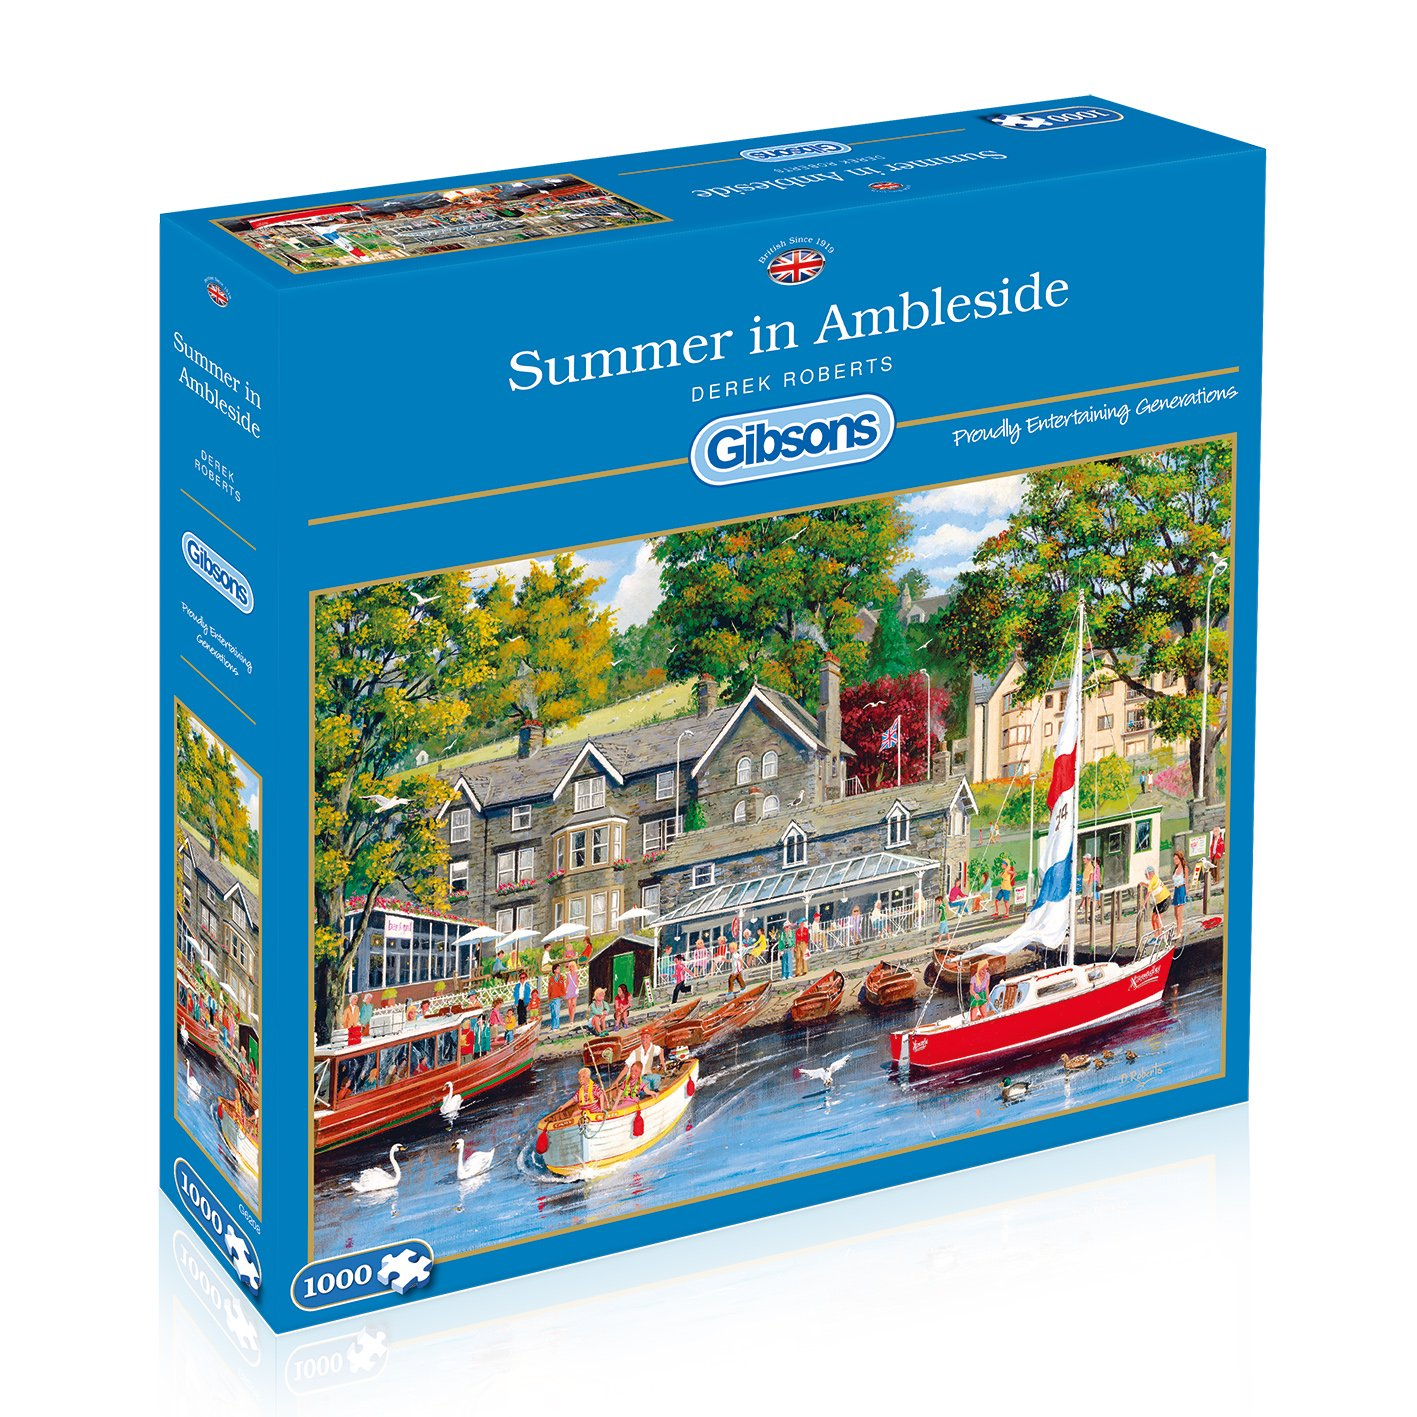 GIBSONS Puzzle Summer - 1000 Teile Puzzle in Ambleside